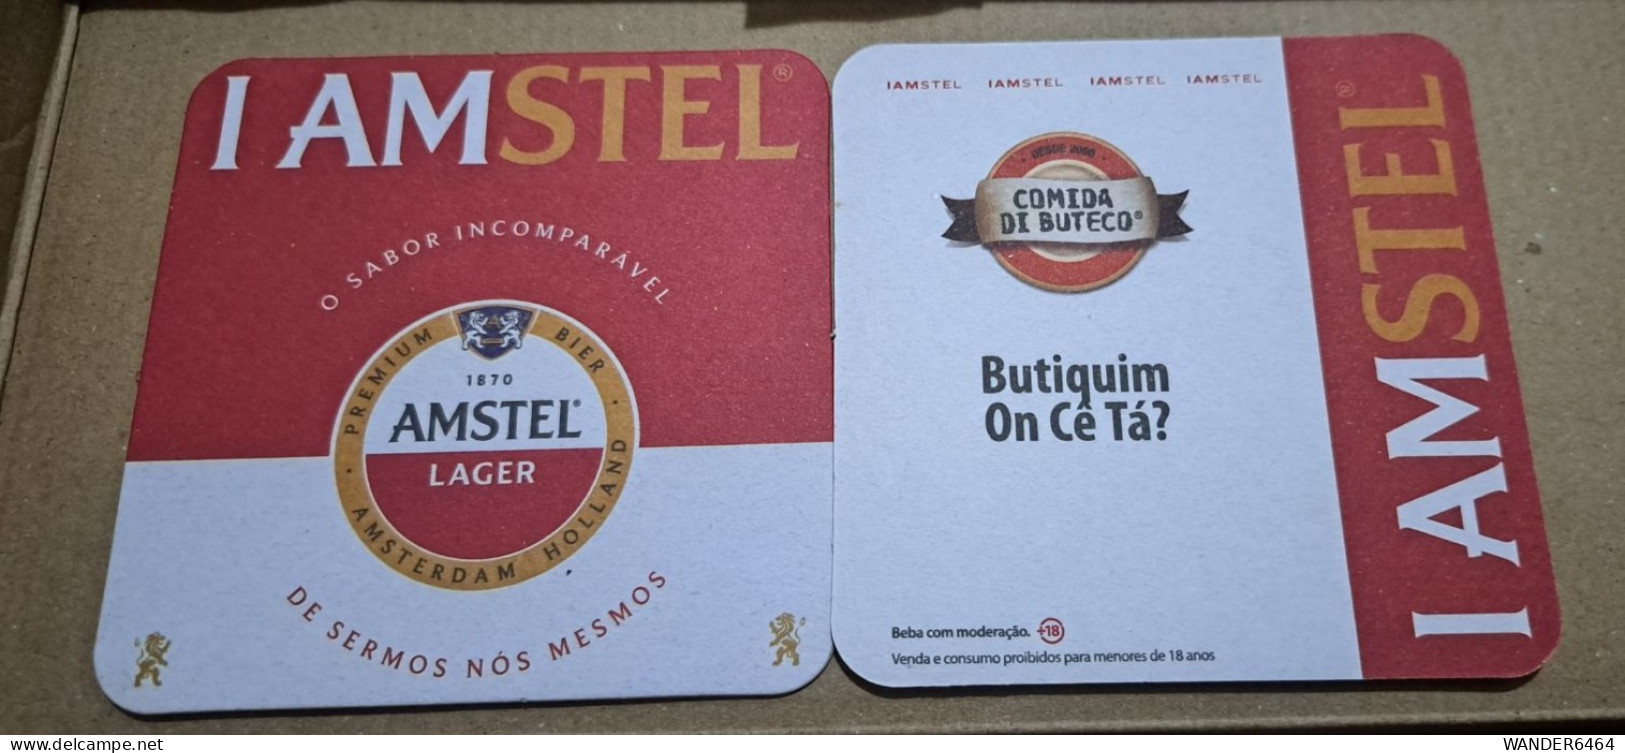 AMSTEL HISTORIC SET BRAZIL BREWERY  BEER  MATS - COASTERS #049 BUTIQUIM ON CE TA - Beer Mats